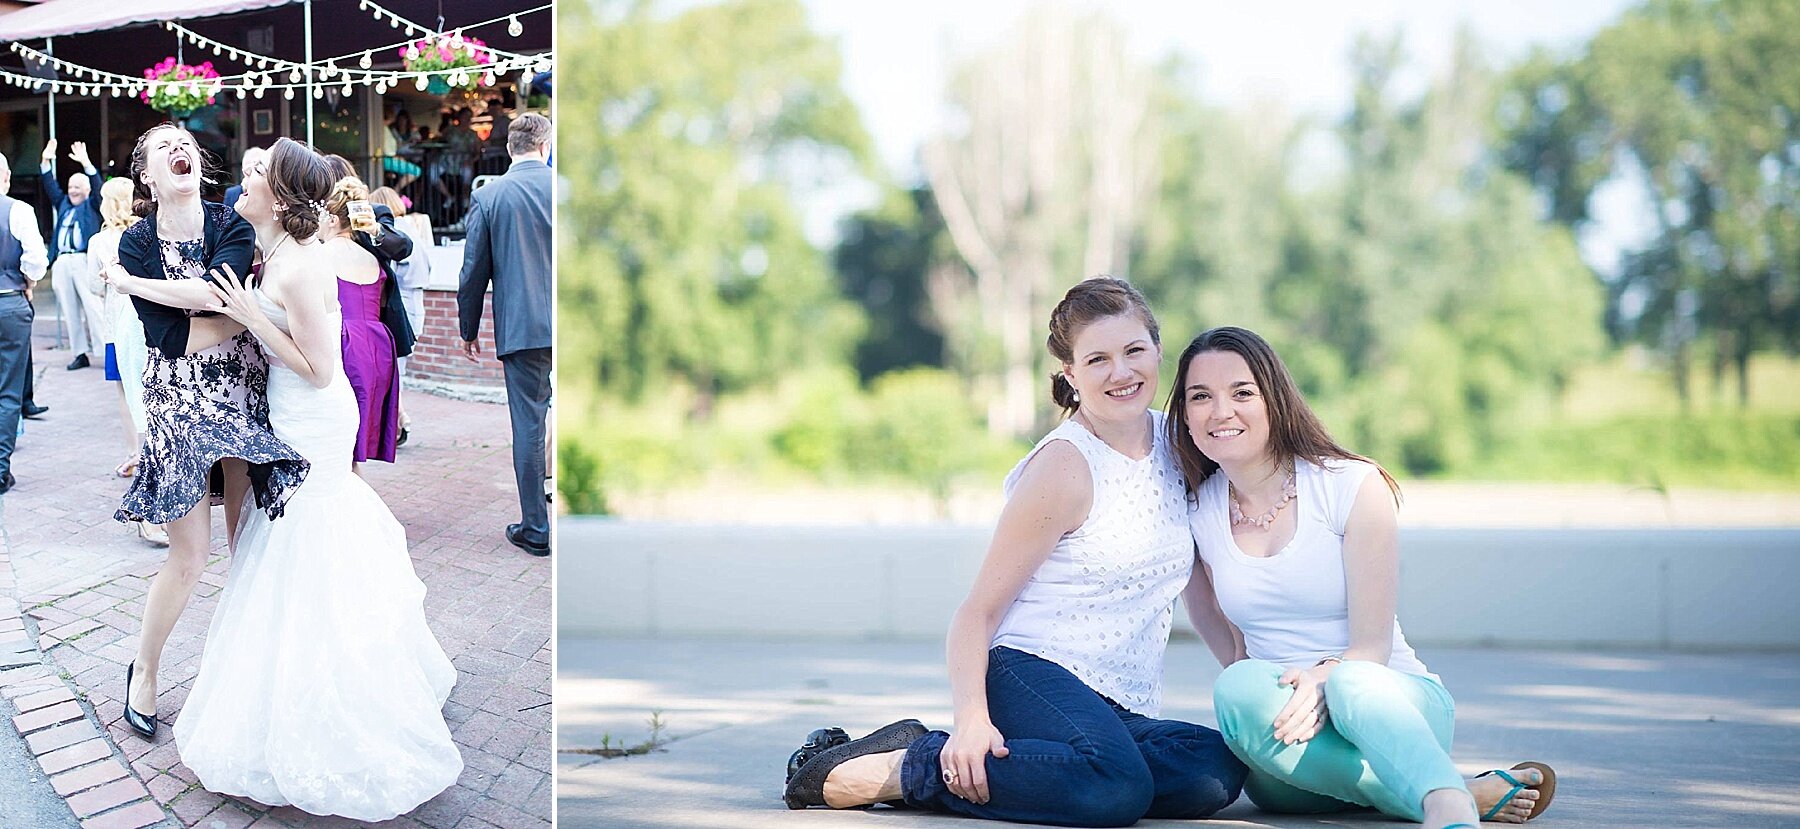 Wendy Zook Photography shares about personal friendships that have defined her adult life. Featuring Nicole Starr Photography | Frederick MD family photographer and blogger